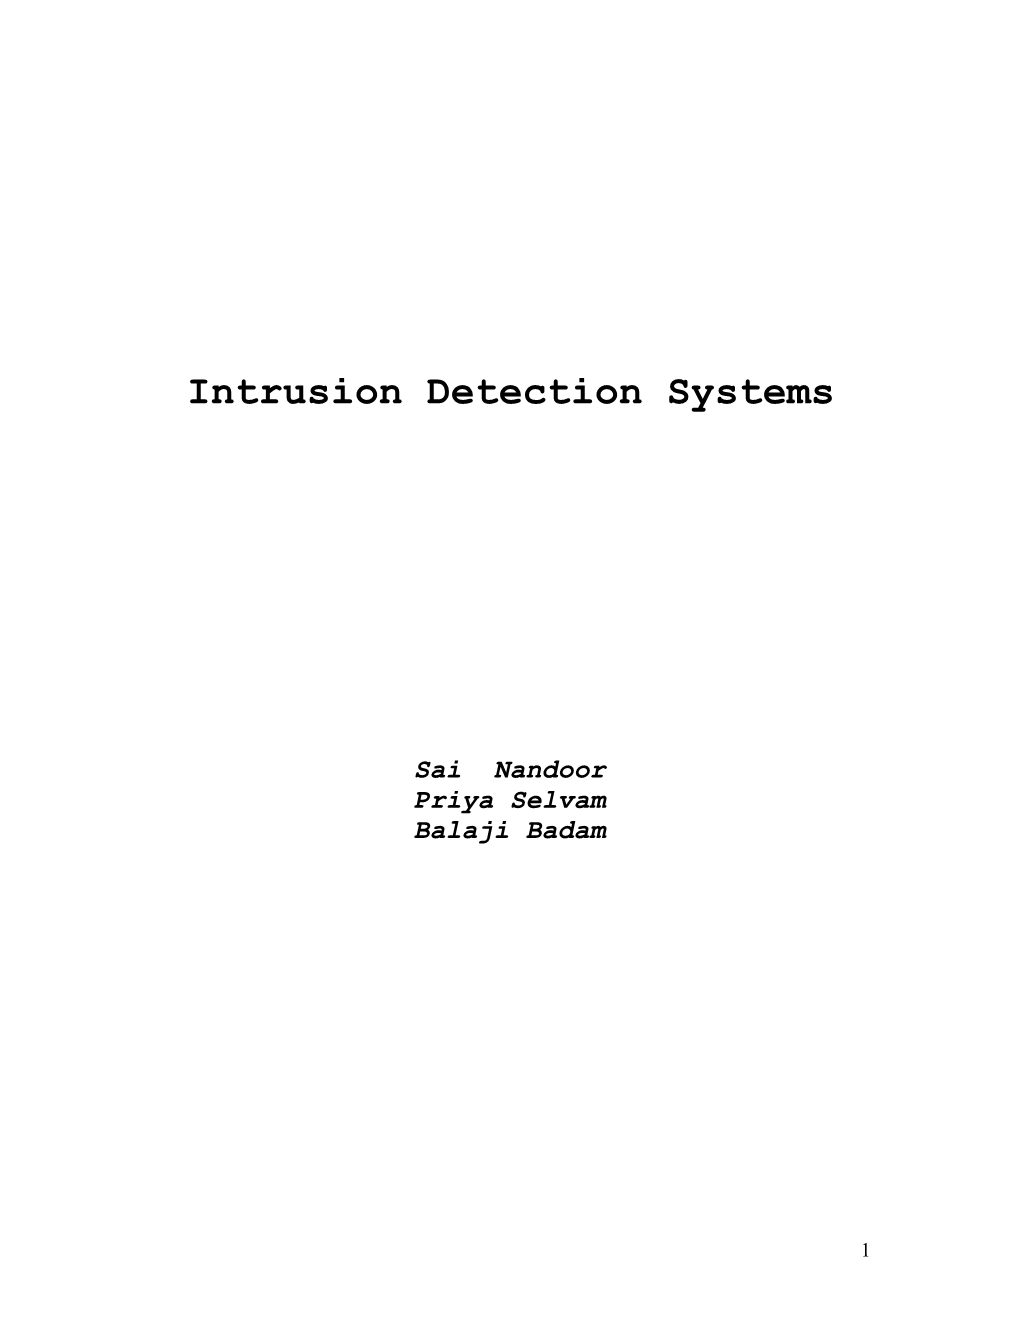 Eluding Network Intrusion Detection